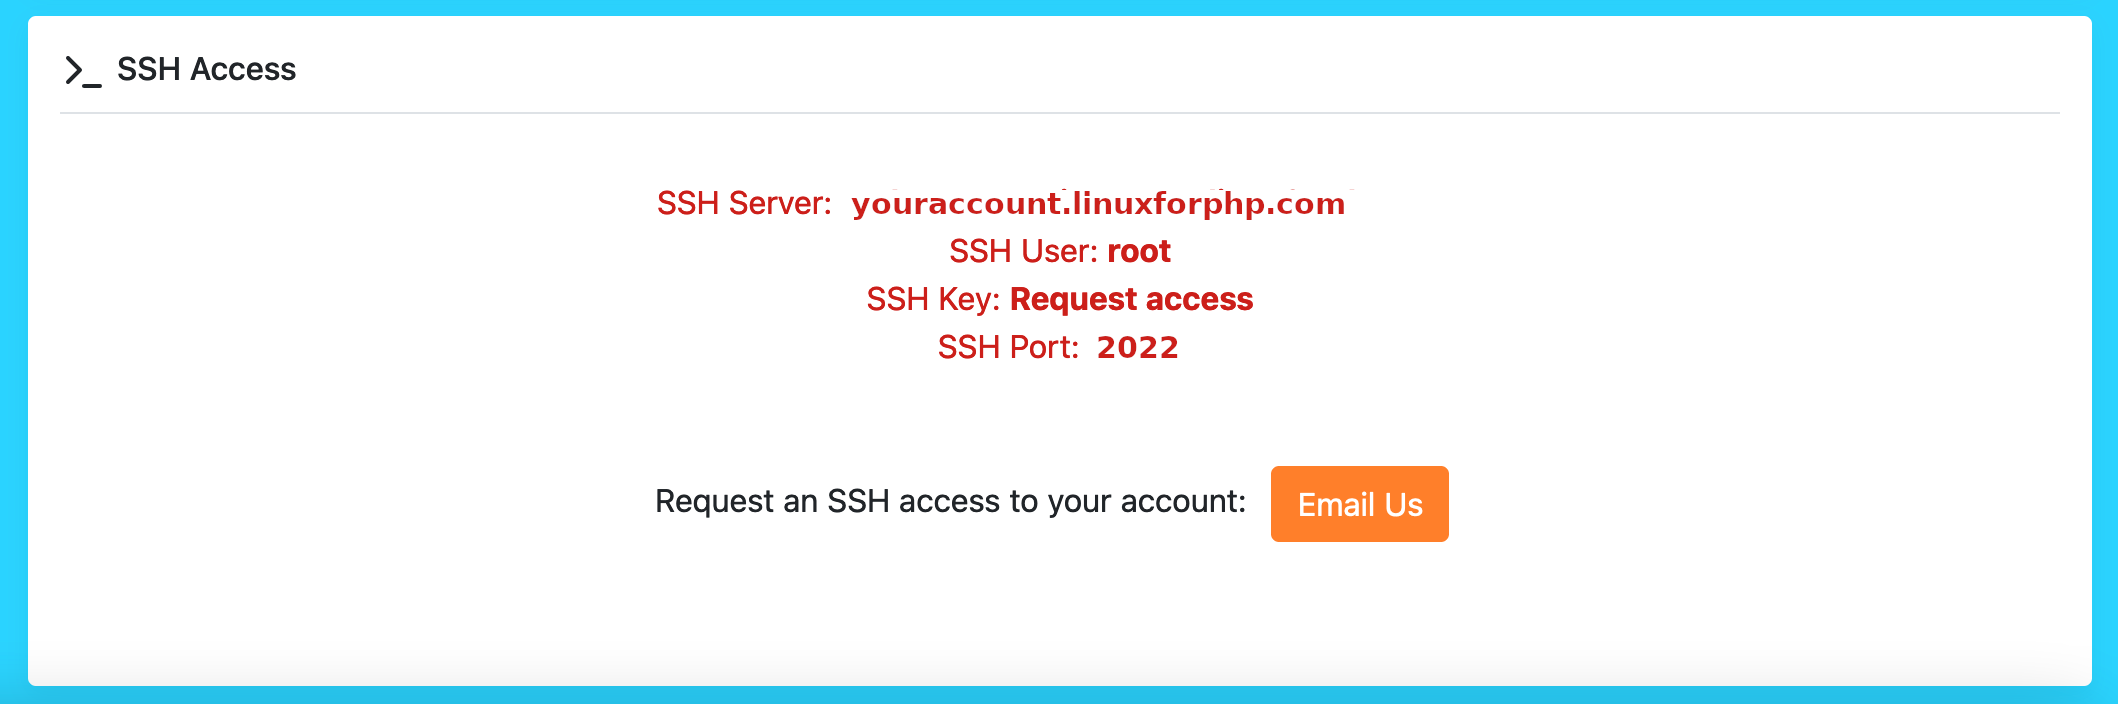 SSH Access section